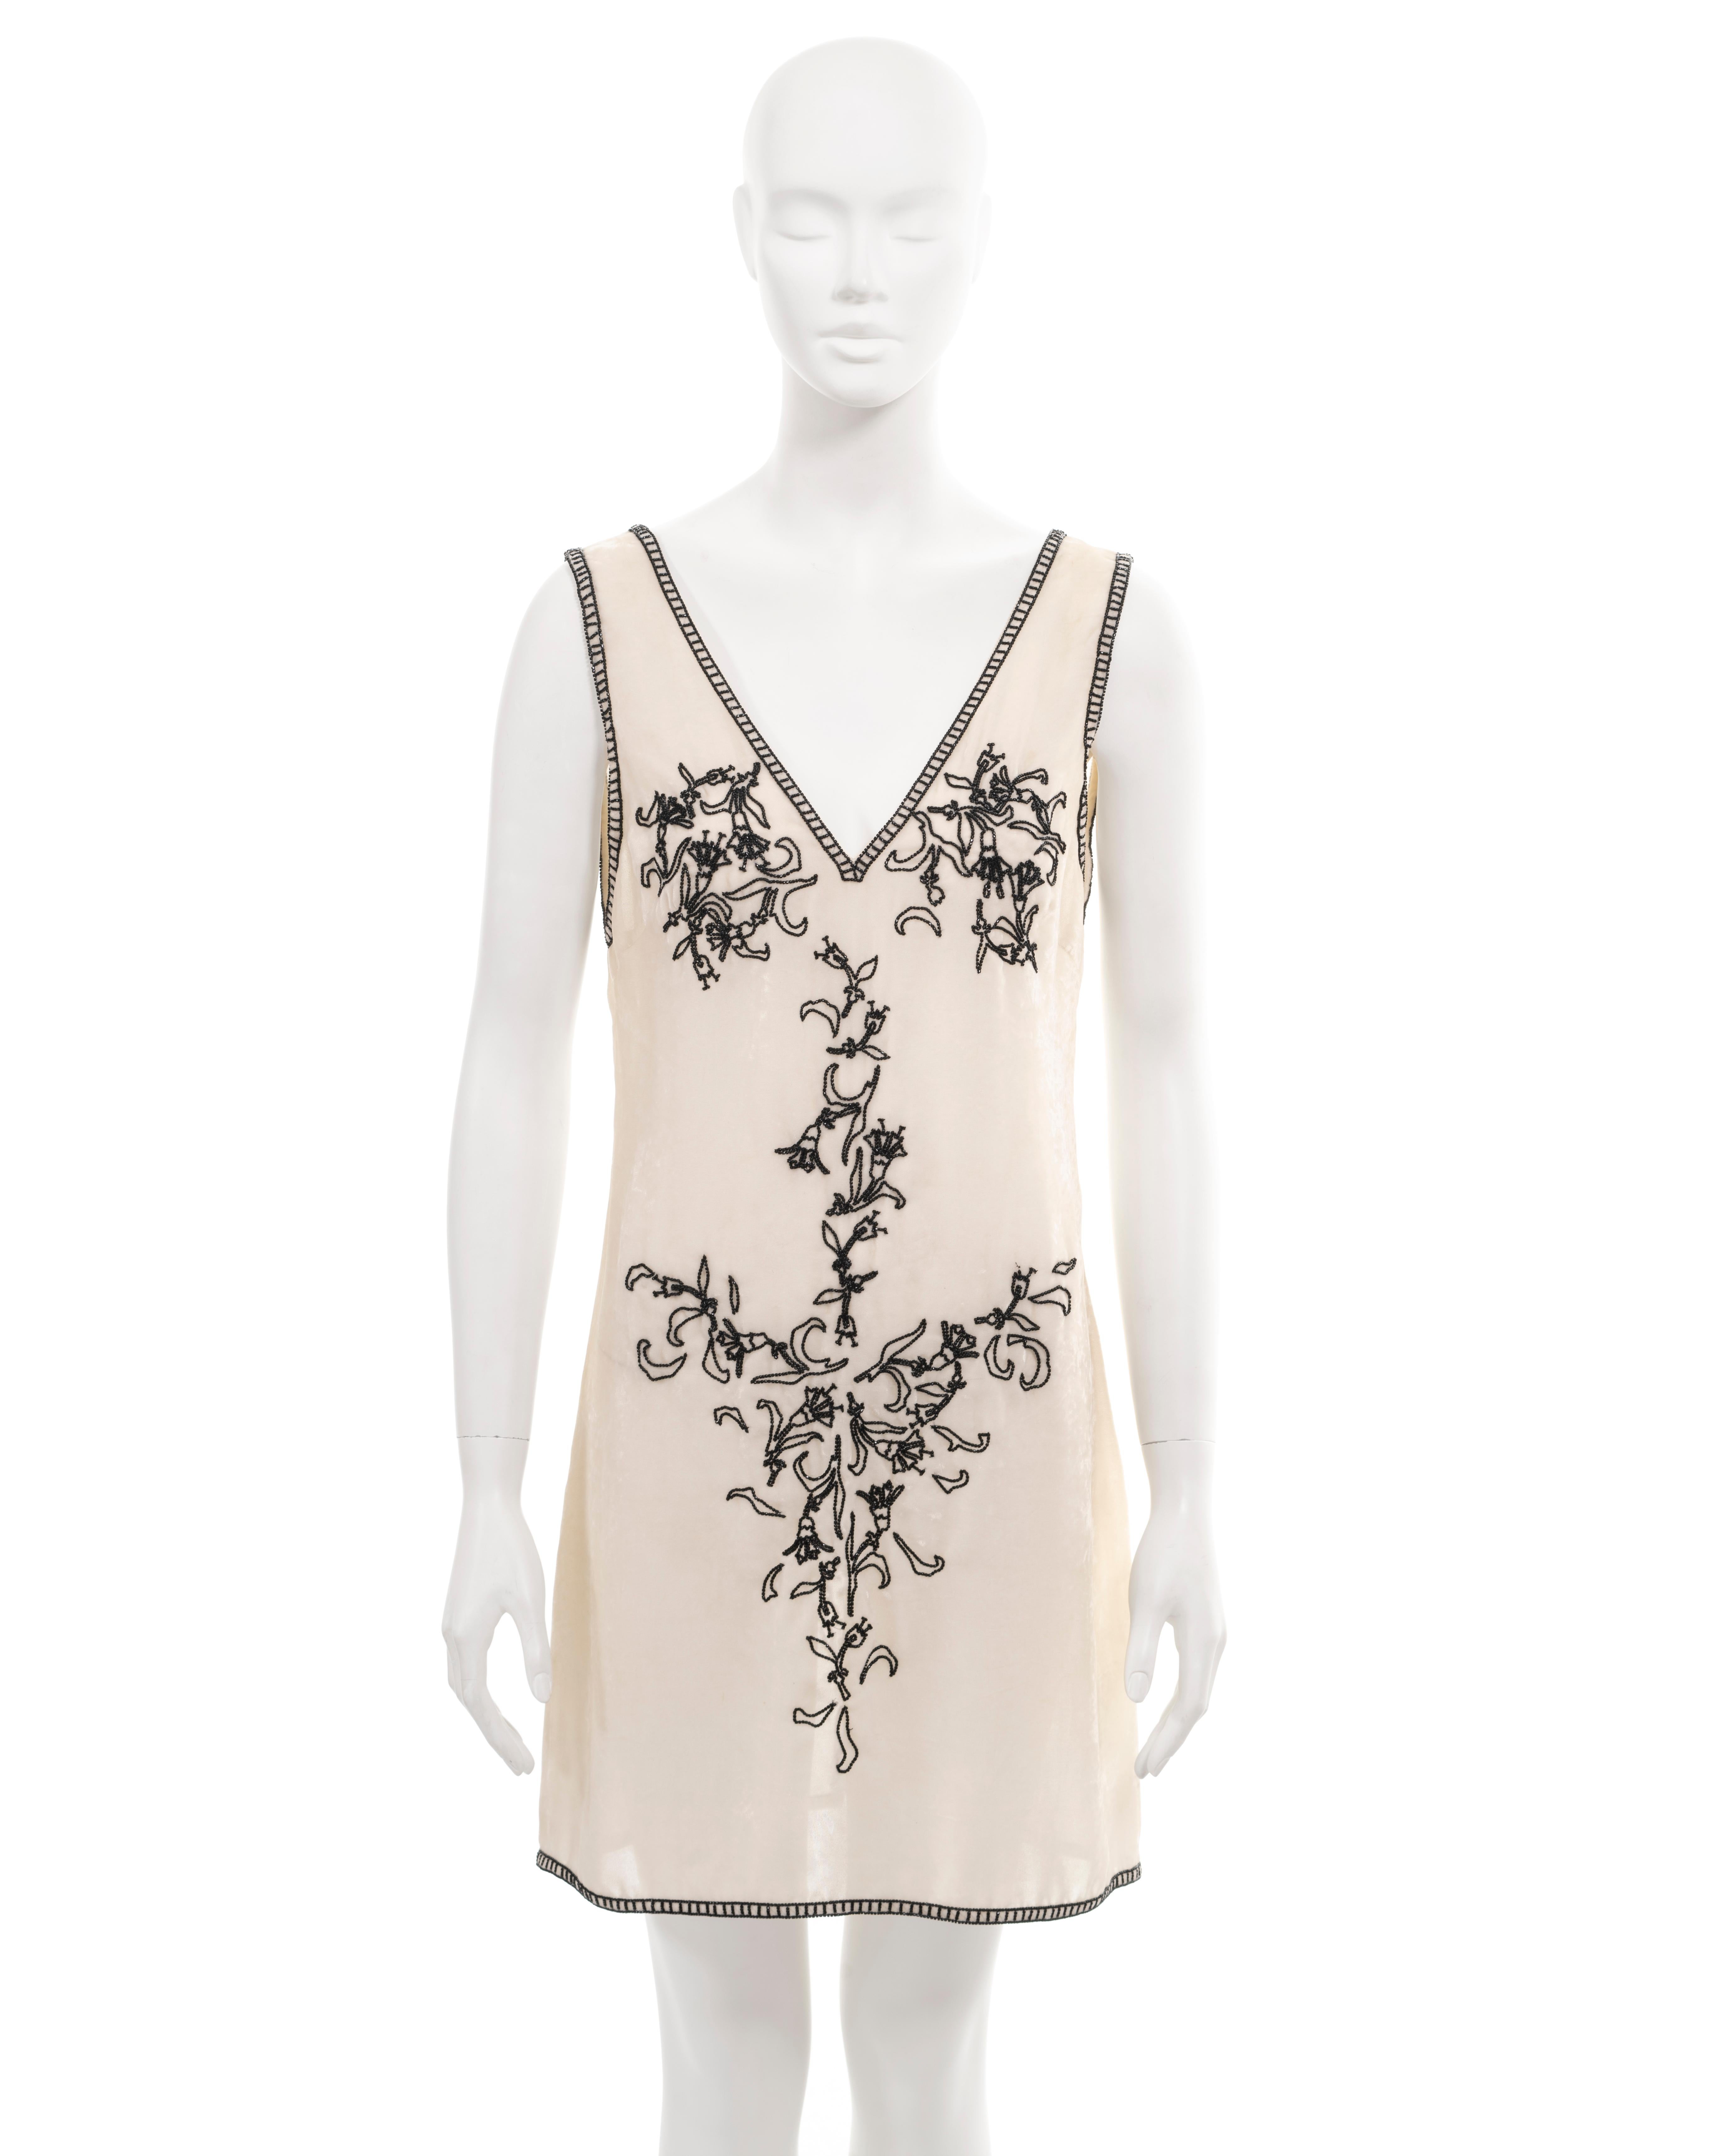 ▪ Archival Prada shift dress
▪ Creative Director: Miuccia Prada
▪ Sold by One of a Kind Archive
▪ Fall-Winter 1997
▪ Ivory crushed velvet 
▪ Black bugle-bead embellishments depict a bikini of campanula flowers and vines 
▪ Deep v-neck
▪ Low back
▪